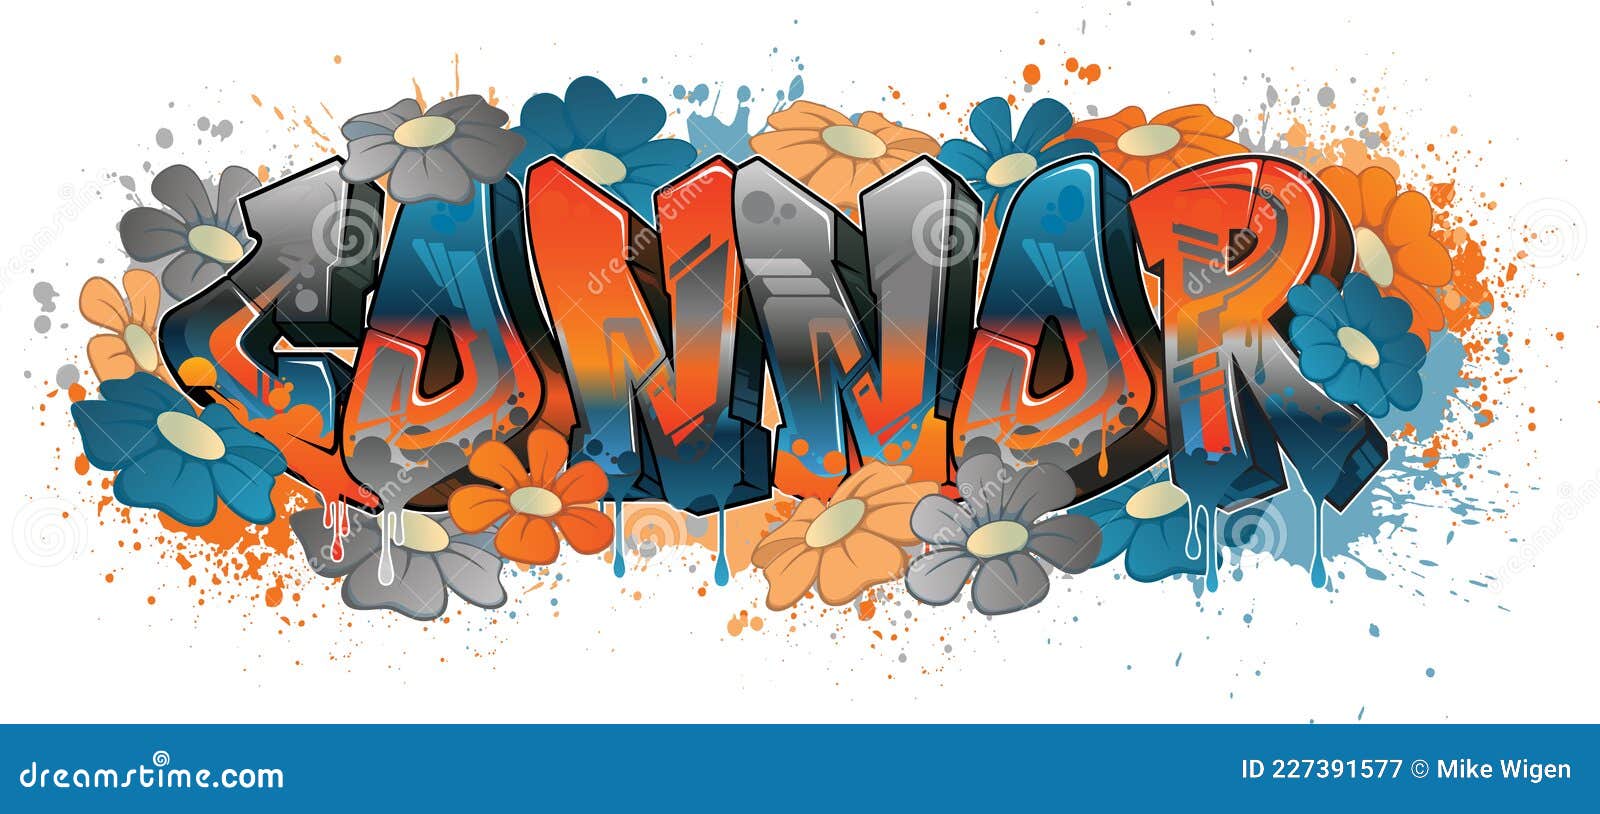 graffiti styled name  - connor